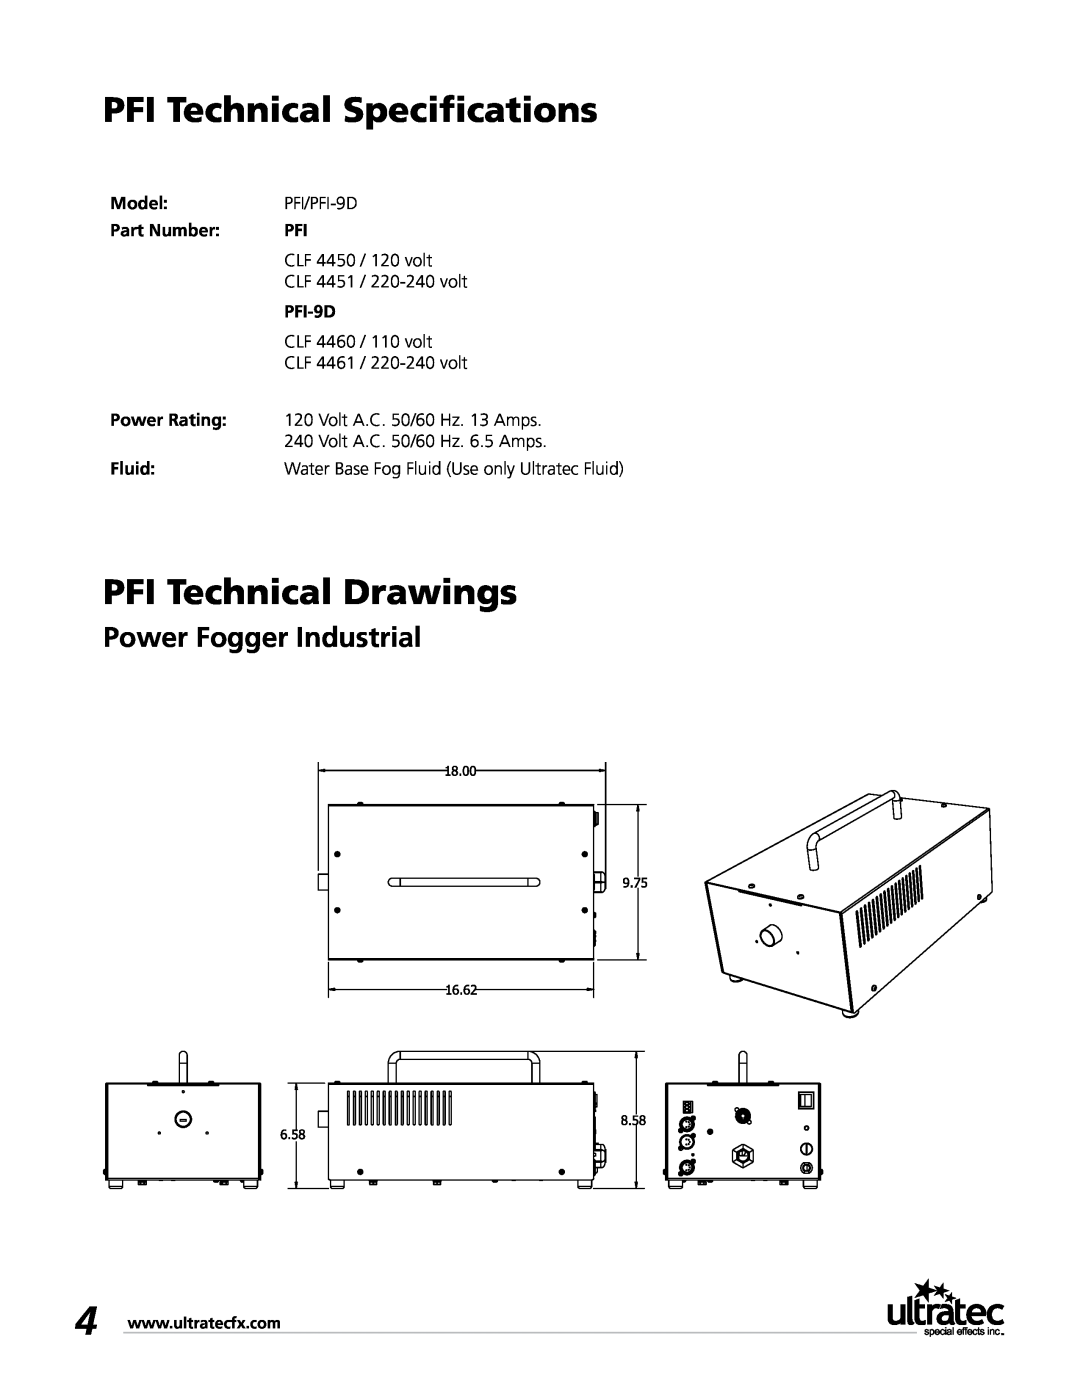 Ultratec PFI-9D PFI Technical Specifications, PFI Technical Drawings, Power Fogger Industrial, Model, Part Number, Fluid 